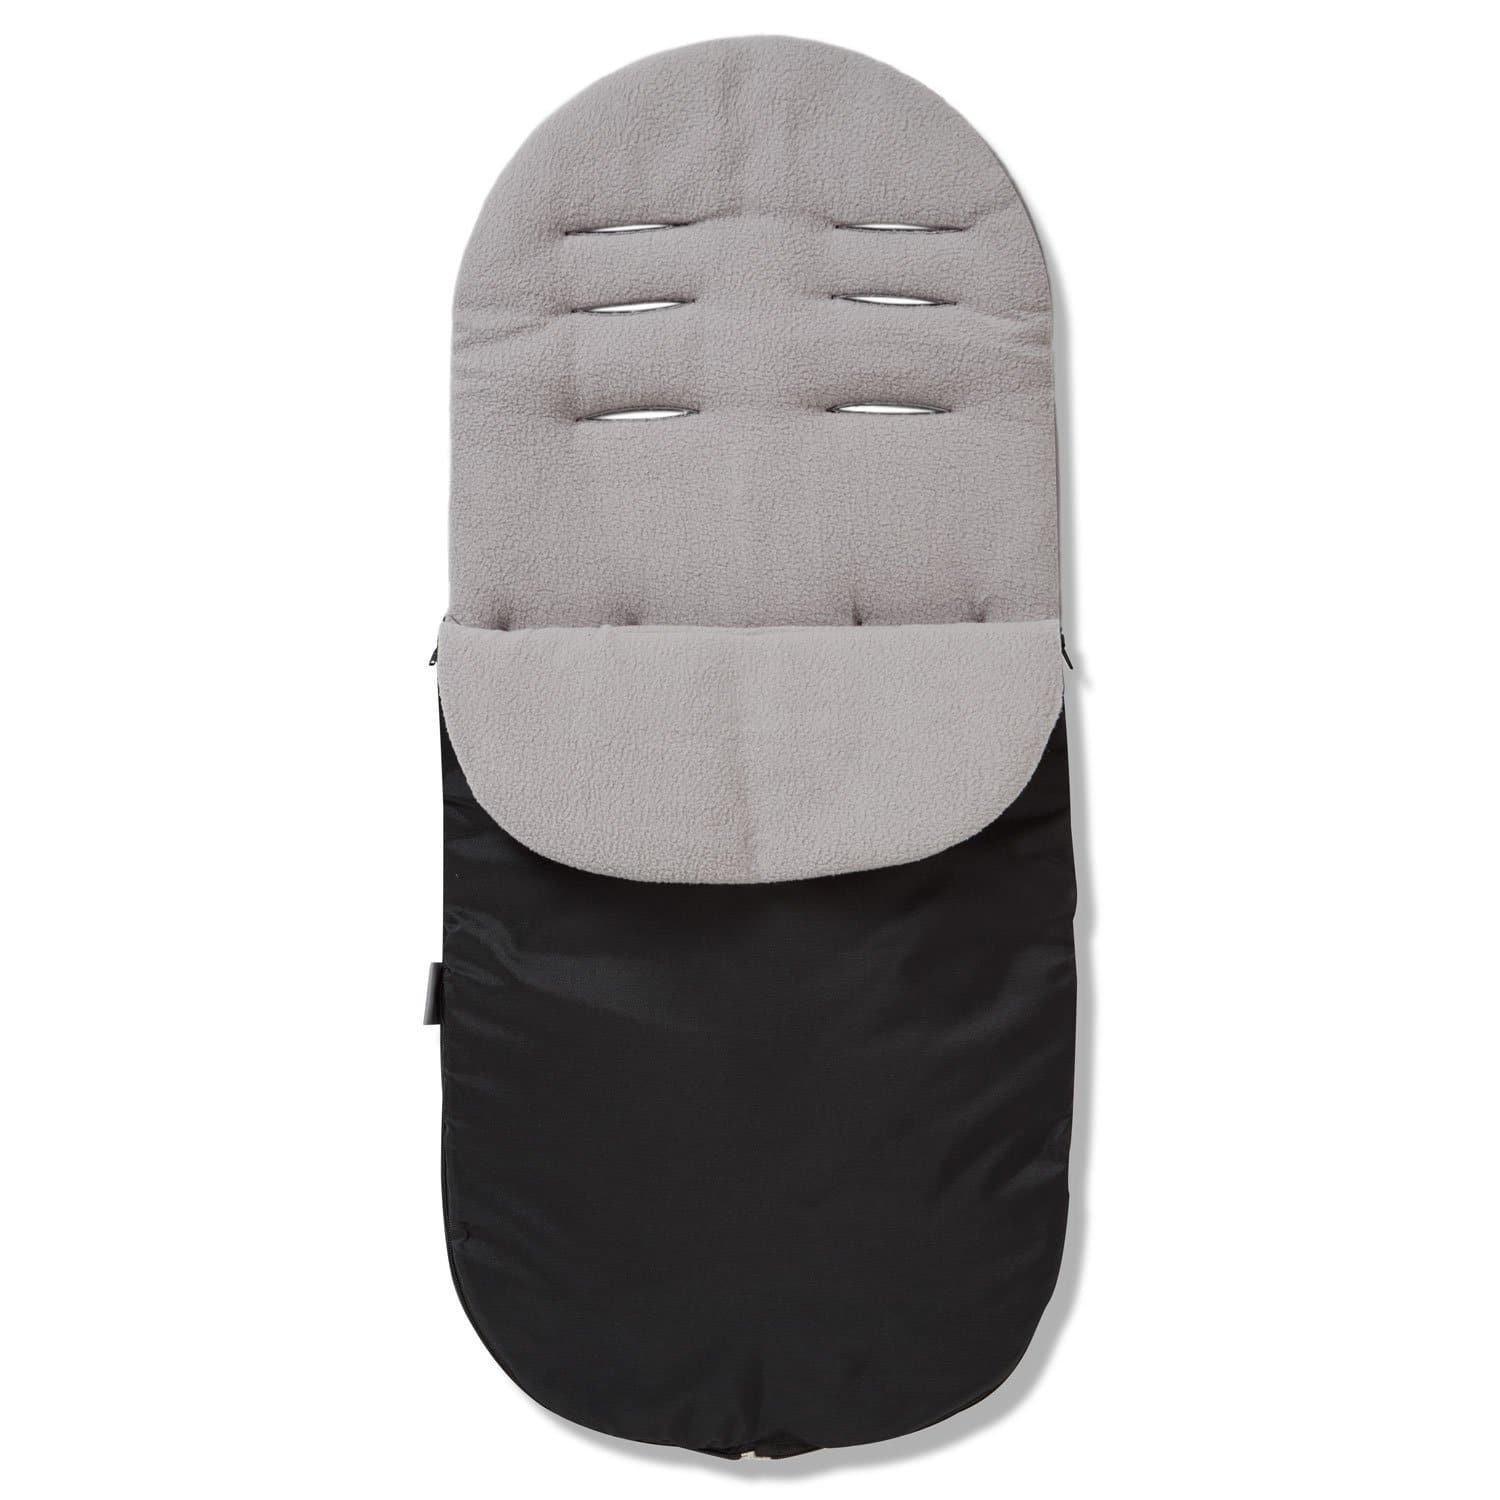 Footmuff / Cosy Toes Compatible with Cybex - Grey / Fits All Models | For Your Little One